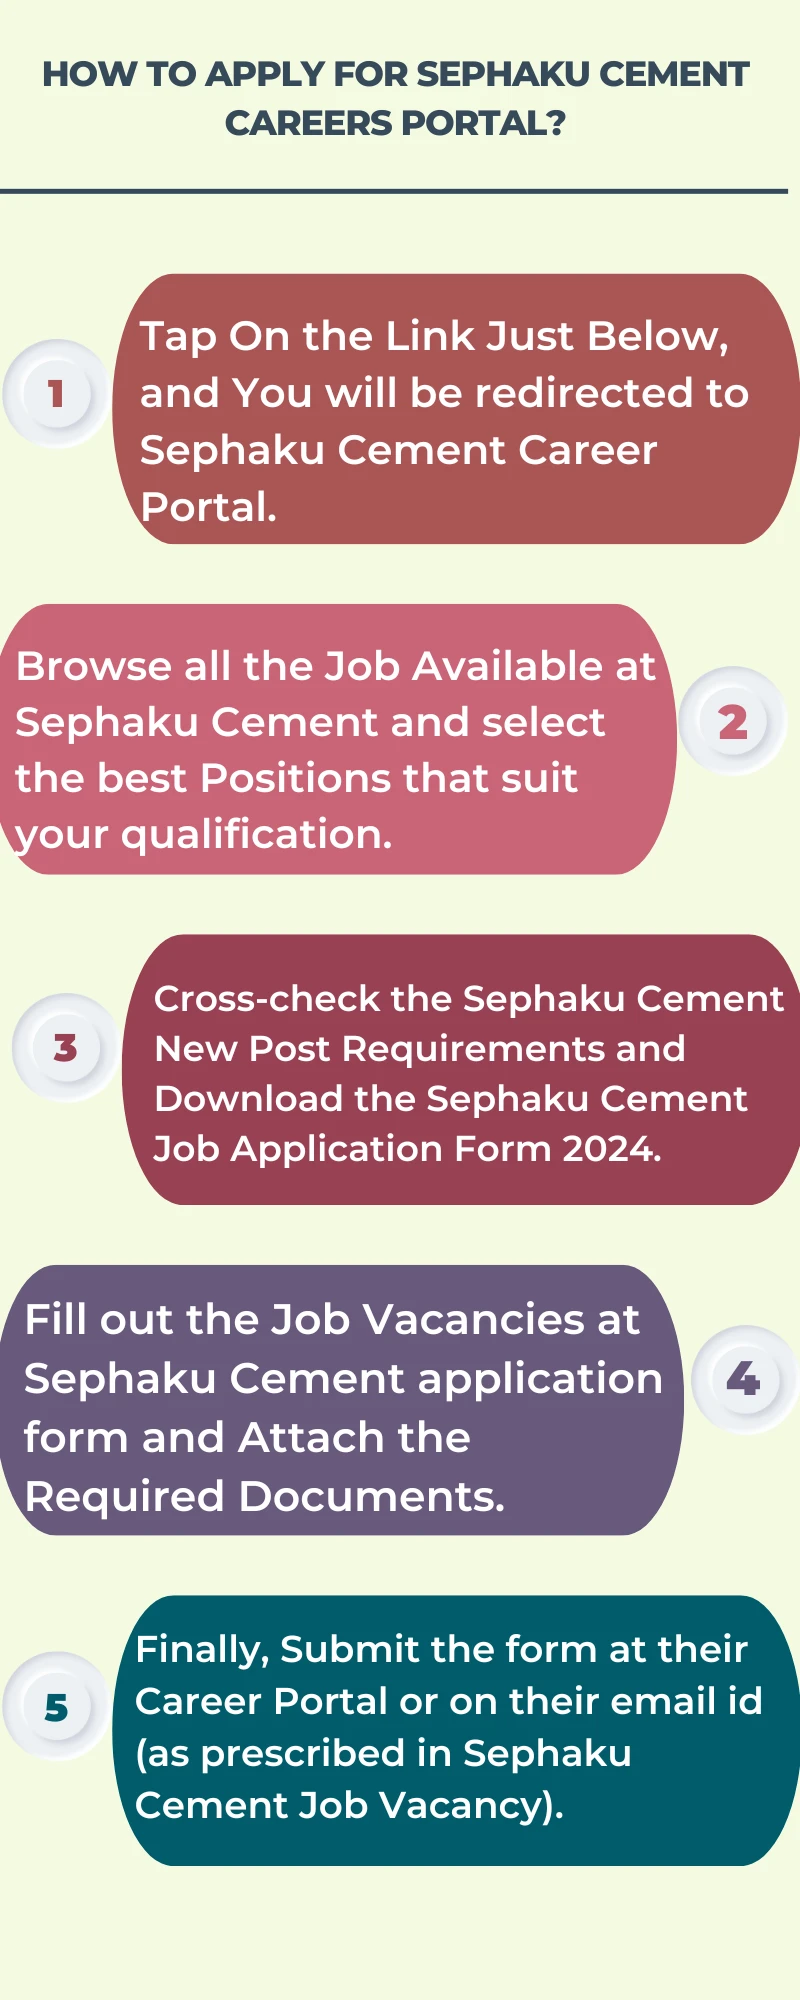 How To Apply for Sephaku Cement Careers Portal?